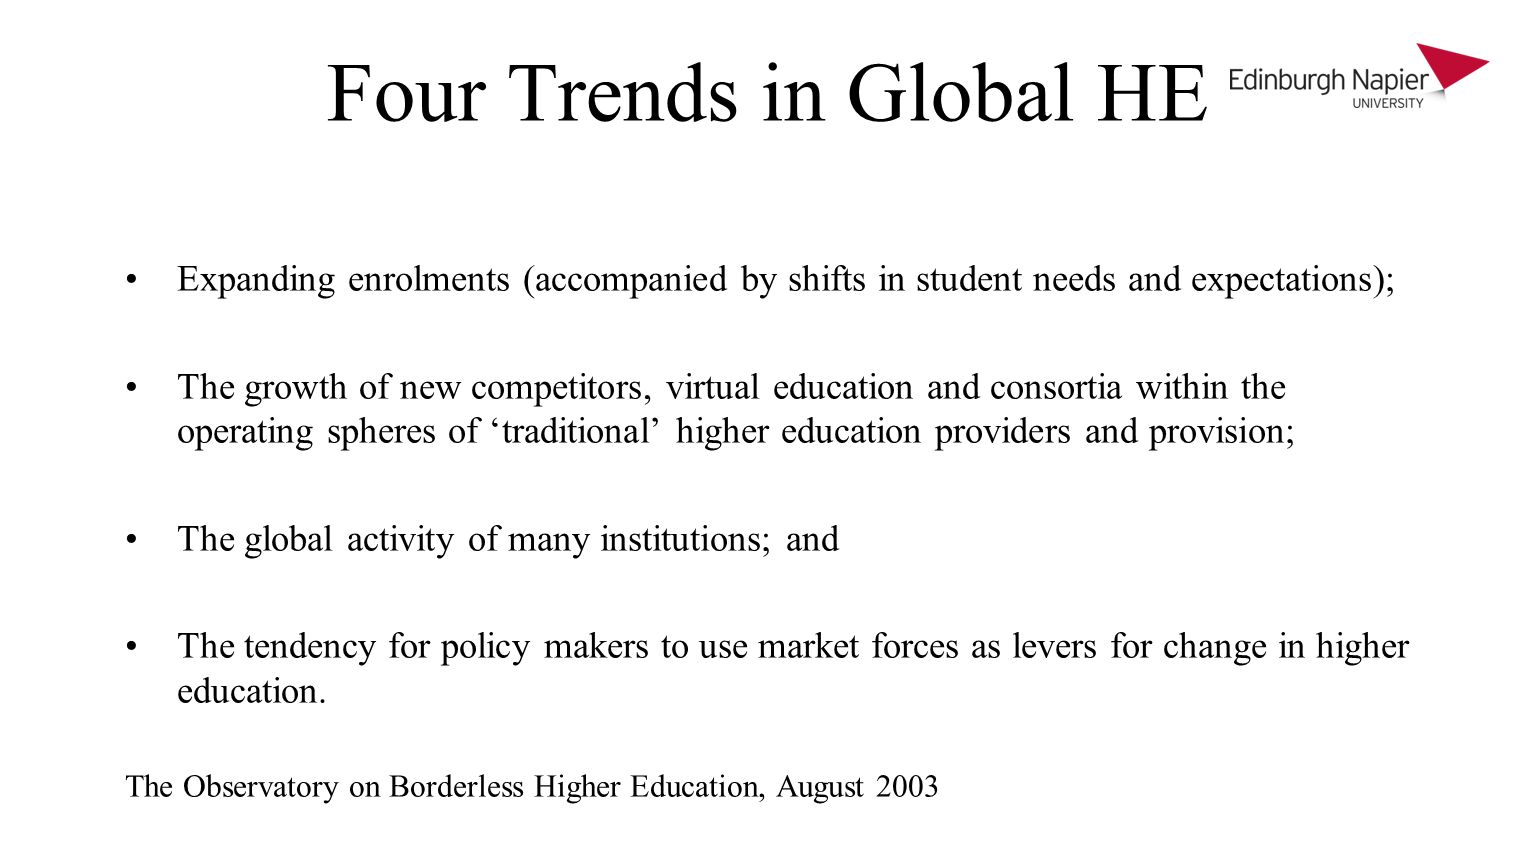 Four Trends in Global HE Expanding enrolments (accompanied by shifts in student needs and expectations); The growth of new competitors, virtual education and consortia within the operating spheres of traditional higher education providers and provision; The global activity of many institutions; and The tendency for policy makers to use market forces as levers for change in higher education.